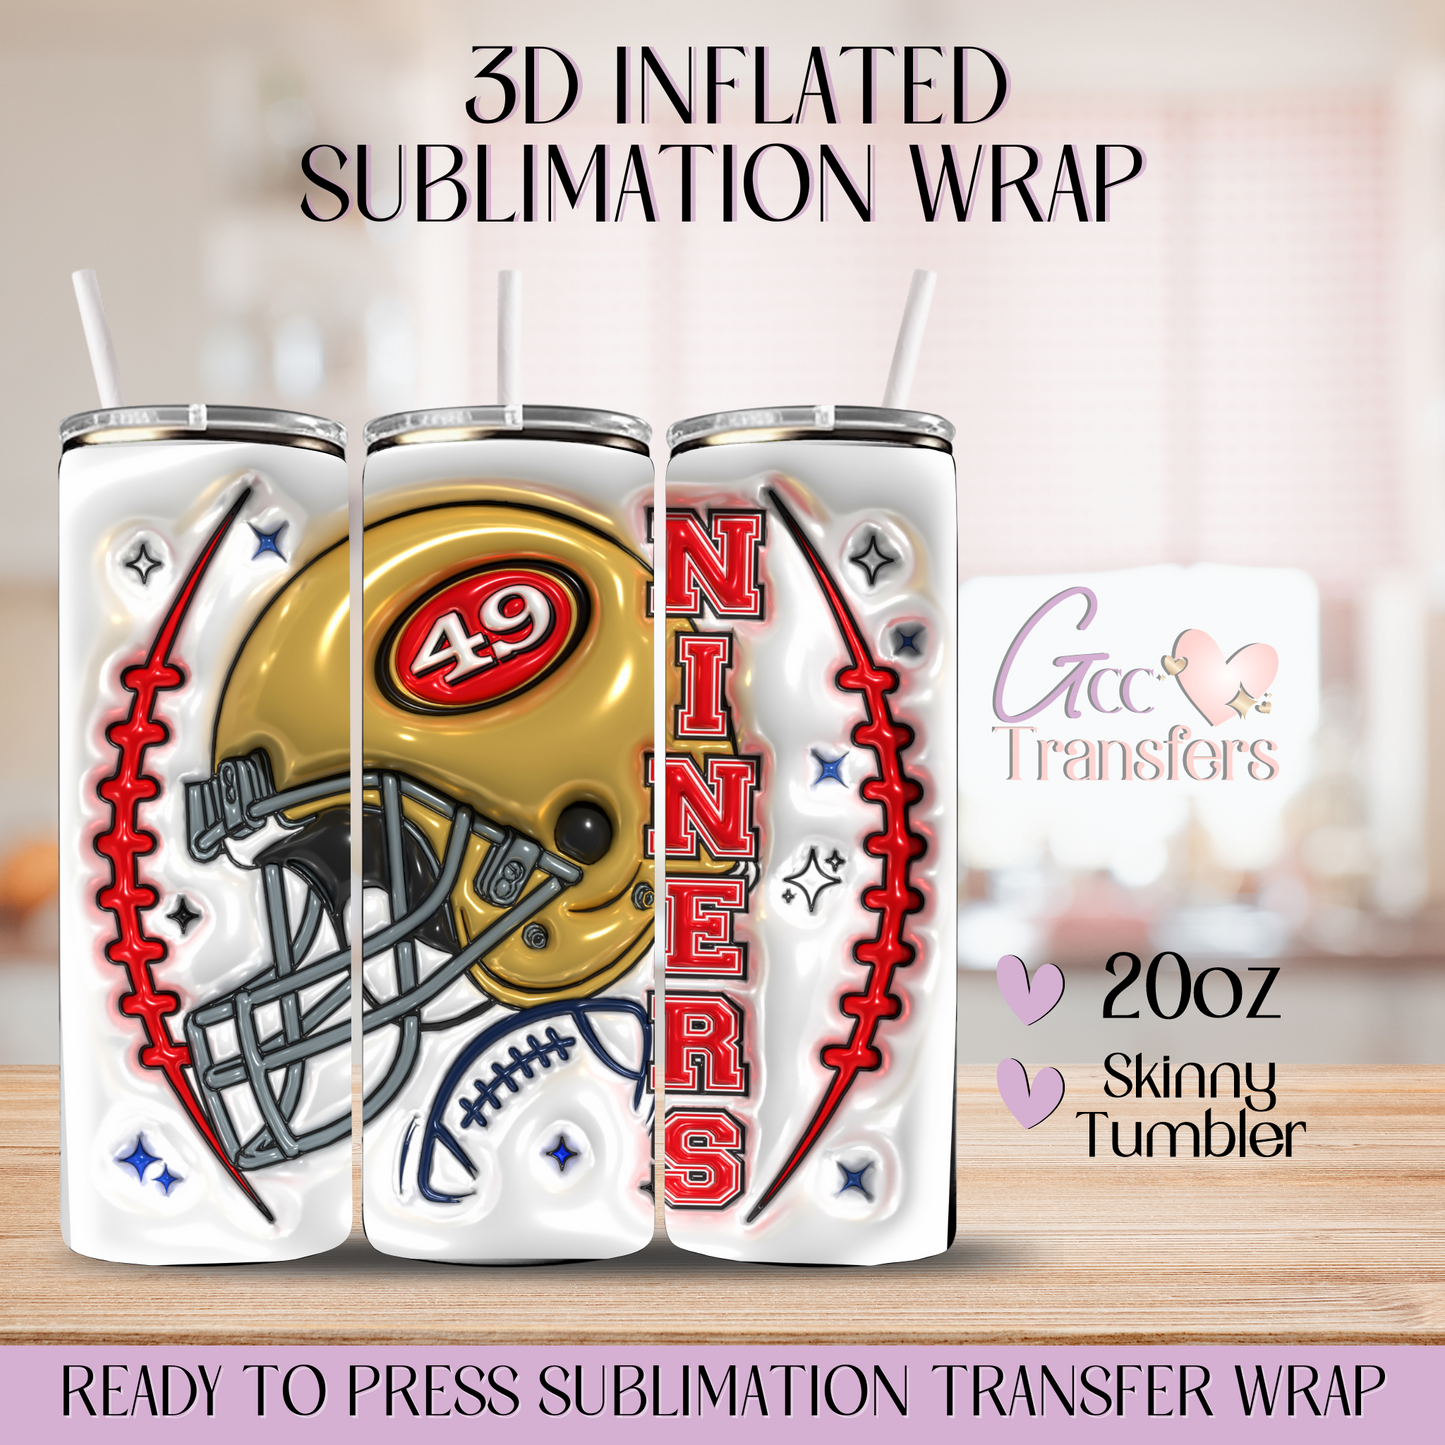 Niners Football - 20oz 3D Inflated Sublimation Wrap